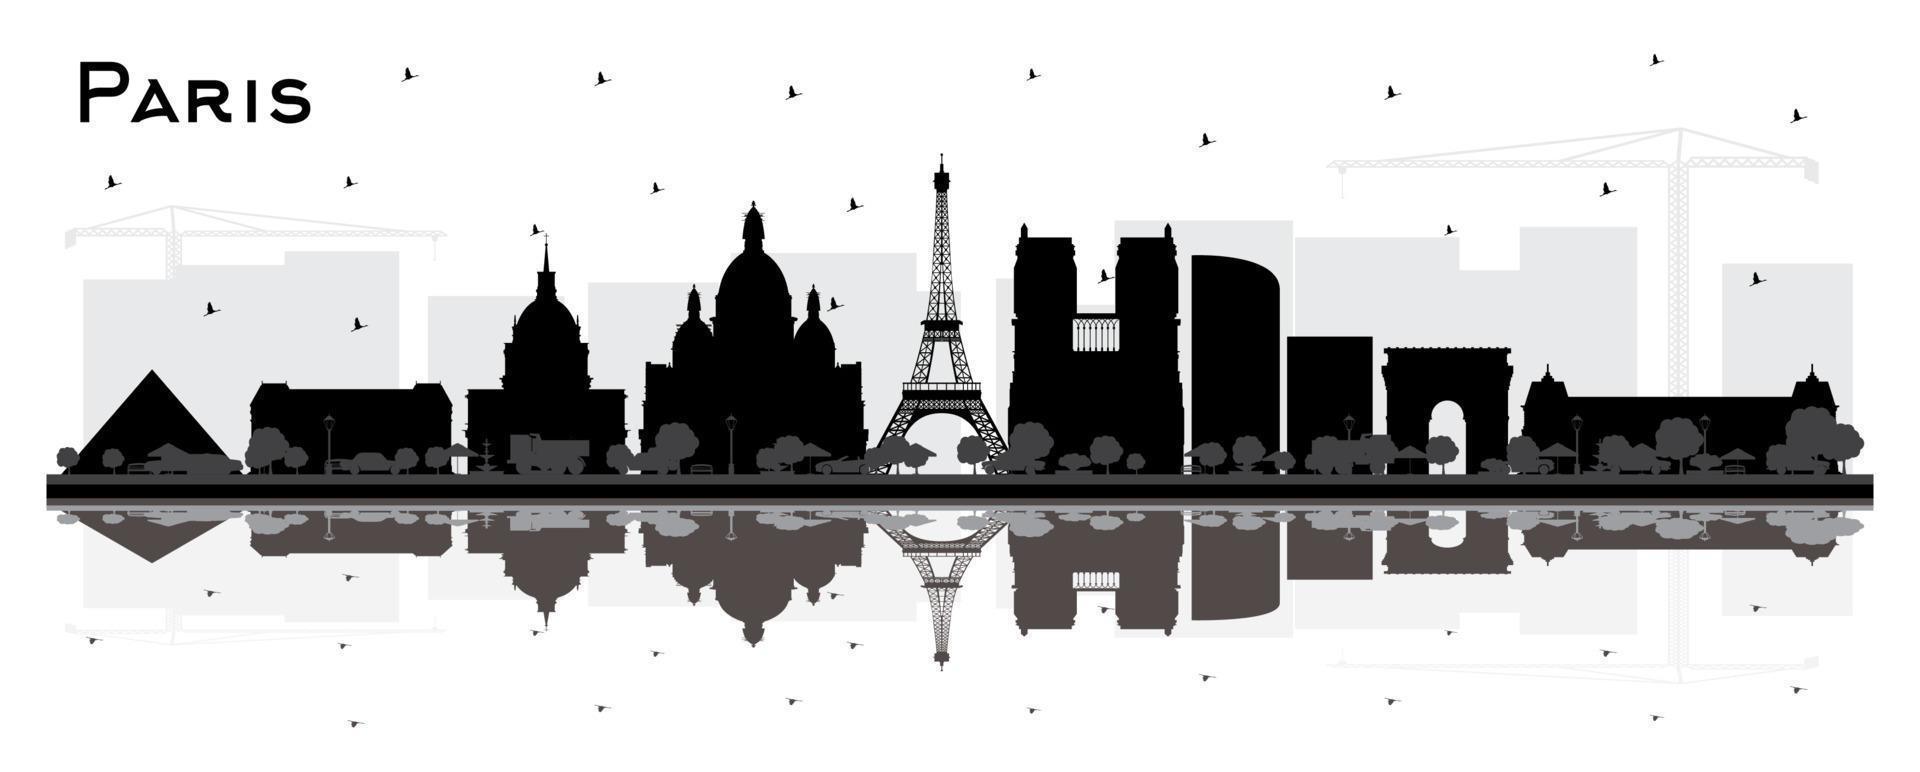 Paris France City Skyline Silhouette with Black Buildings and Reflections Isolated on White. vector